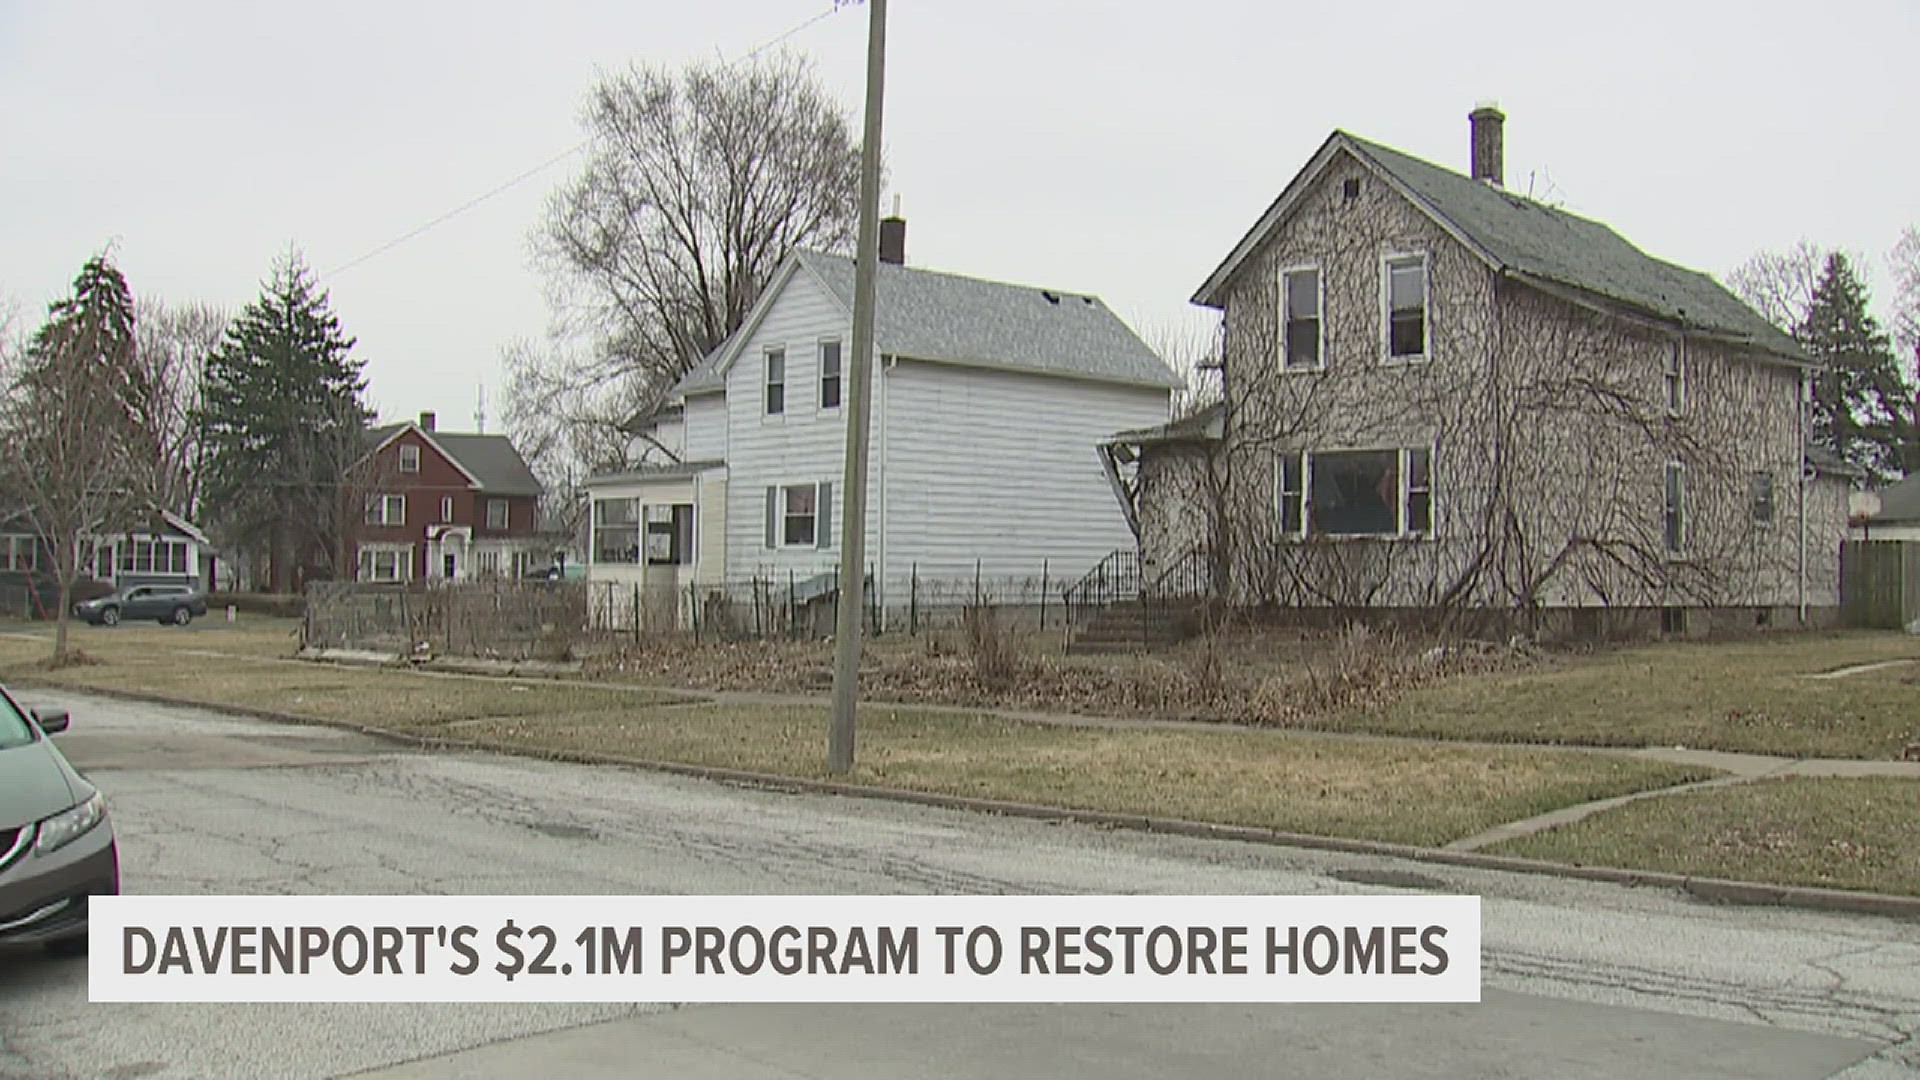 The 'Extreme DREAM' program is focused on improving homes near Gaines Street, between Locust and 5th Streets.